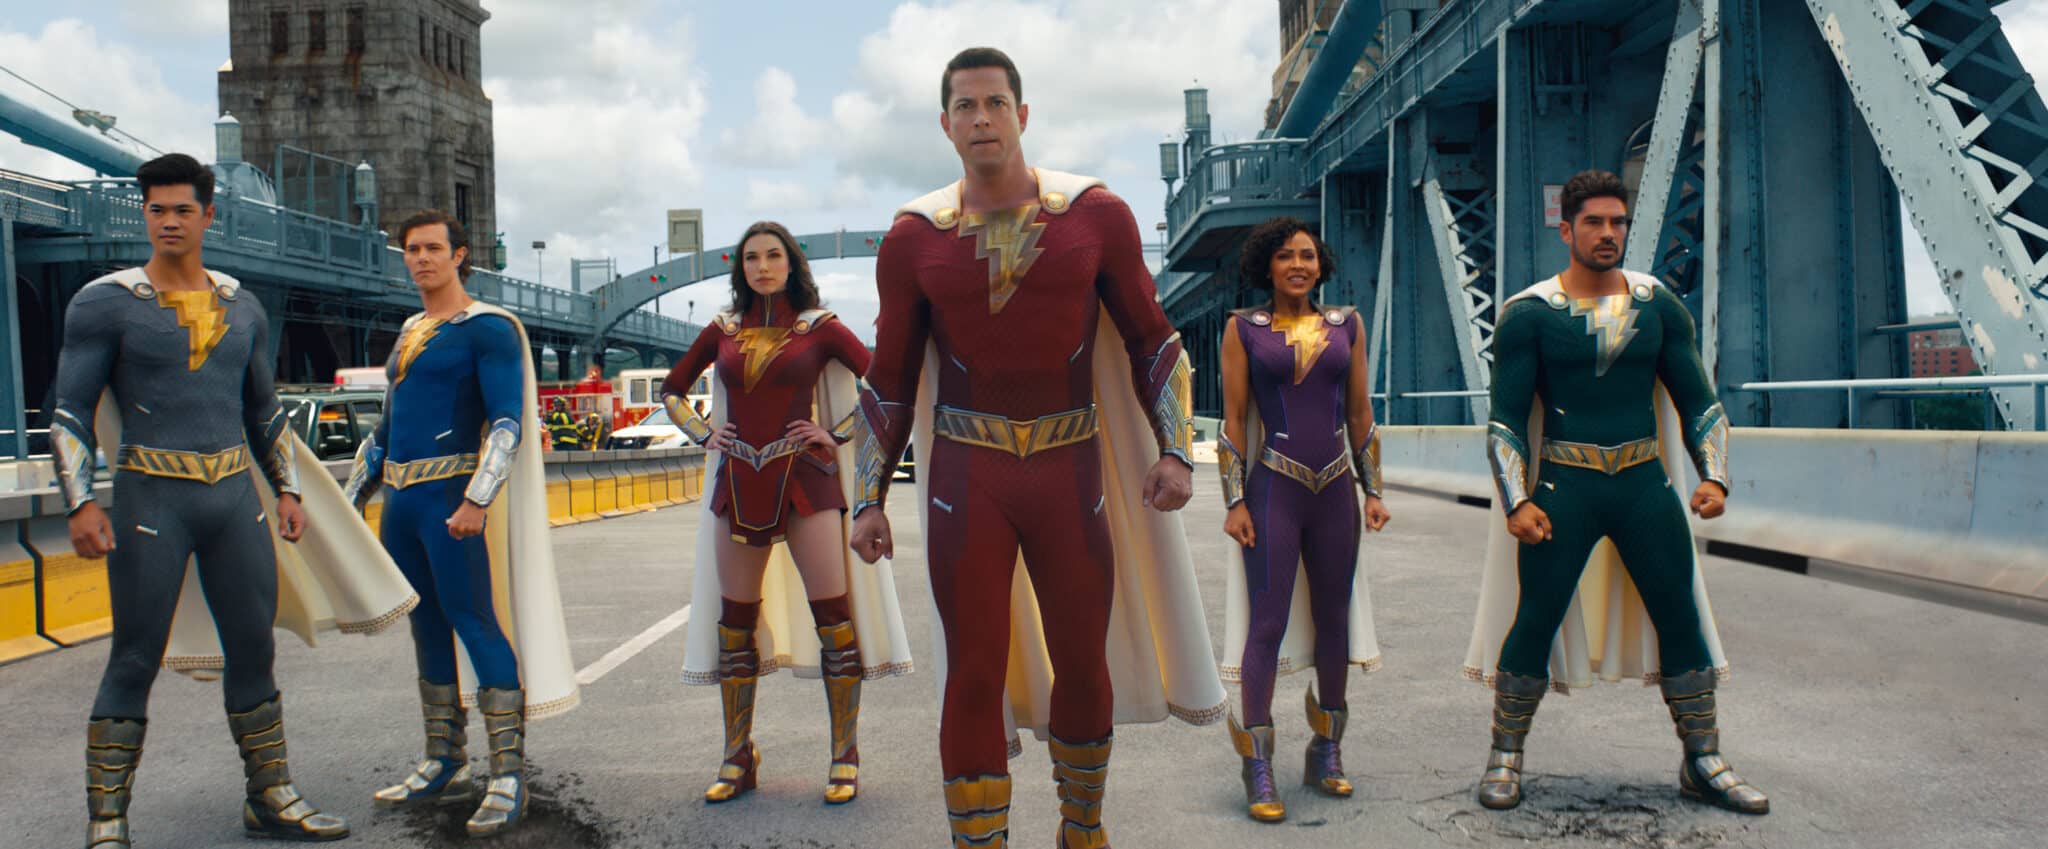 shazam fury of the gods hbo max streaming release